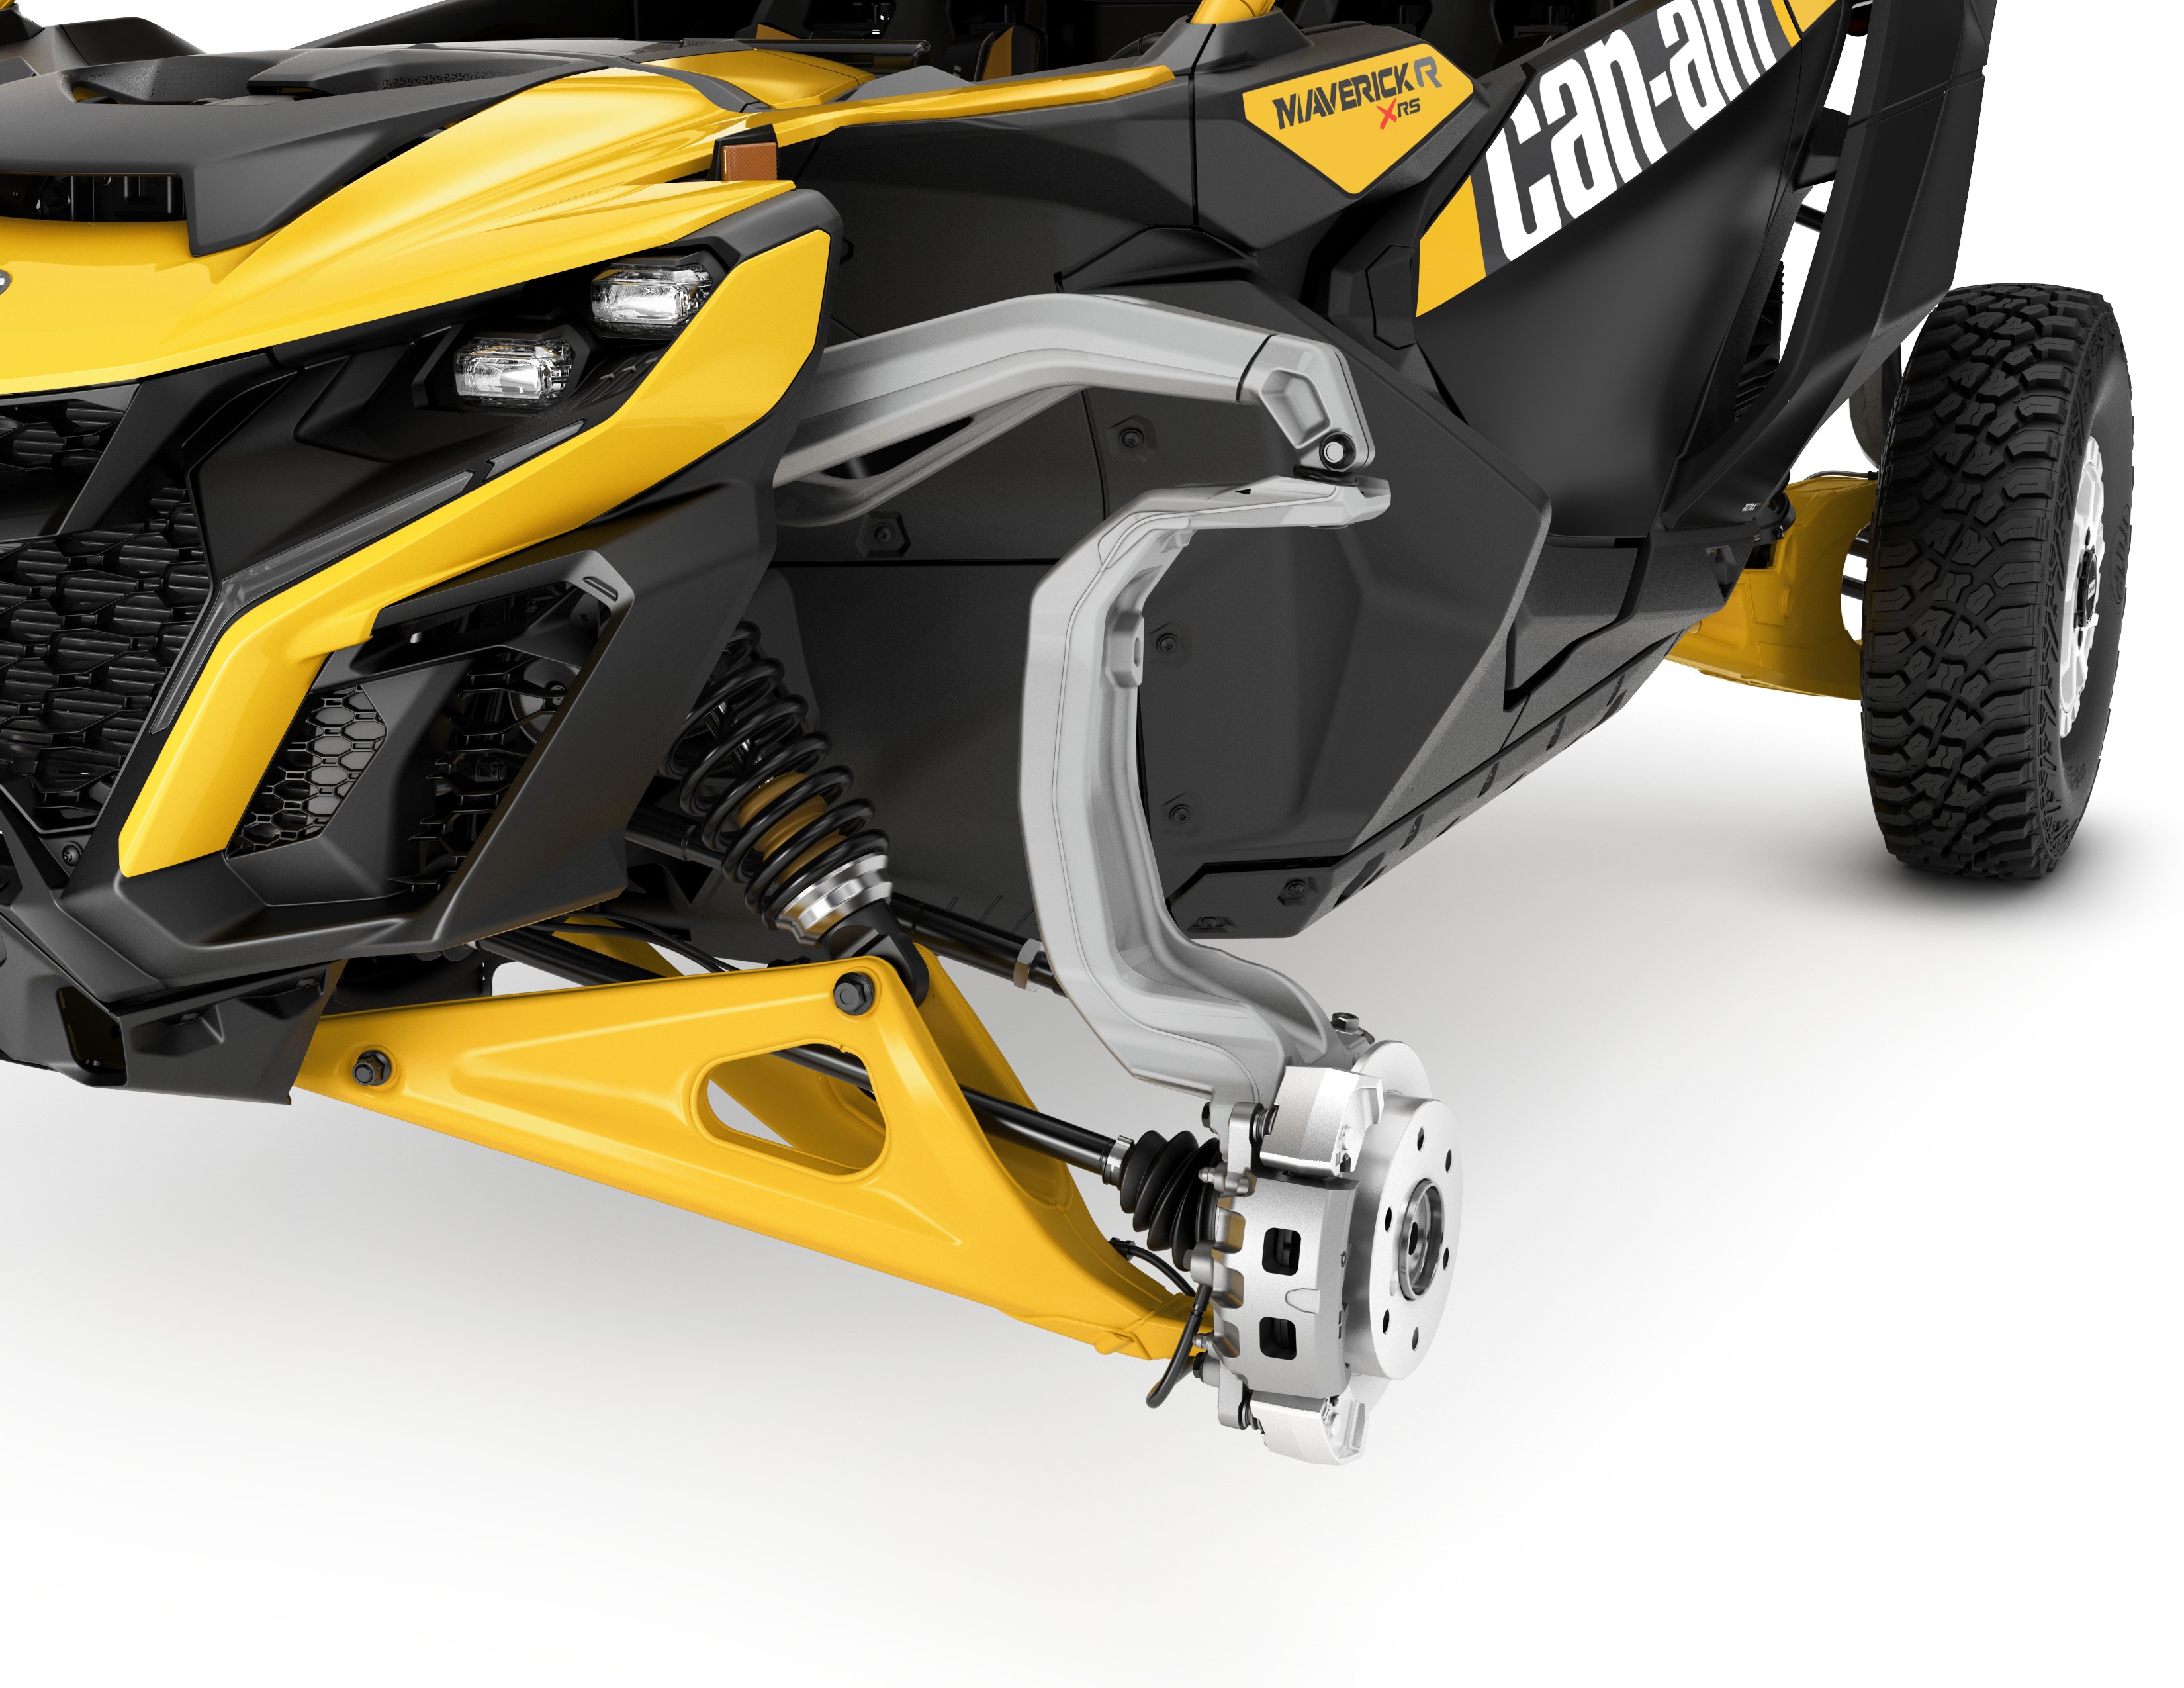 View of the Can-Am Maverick R suspension